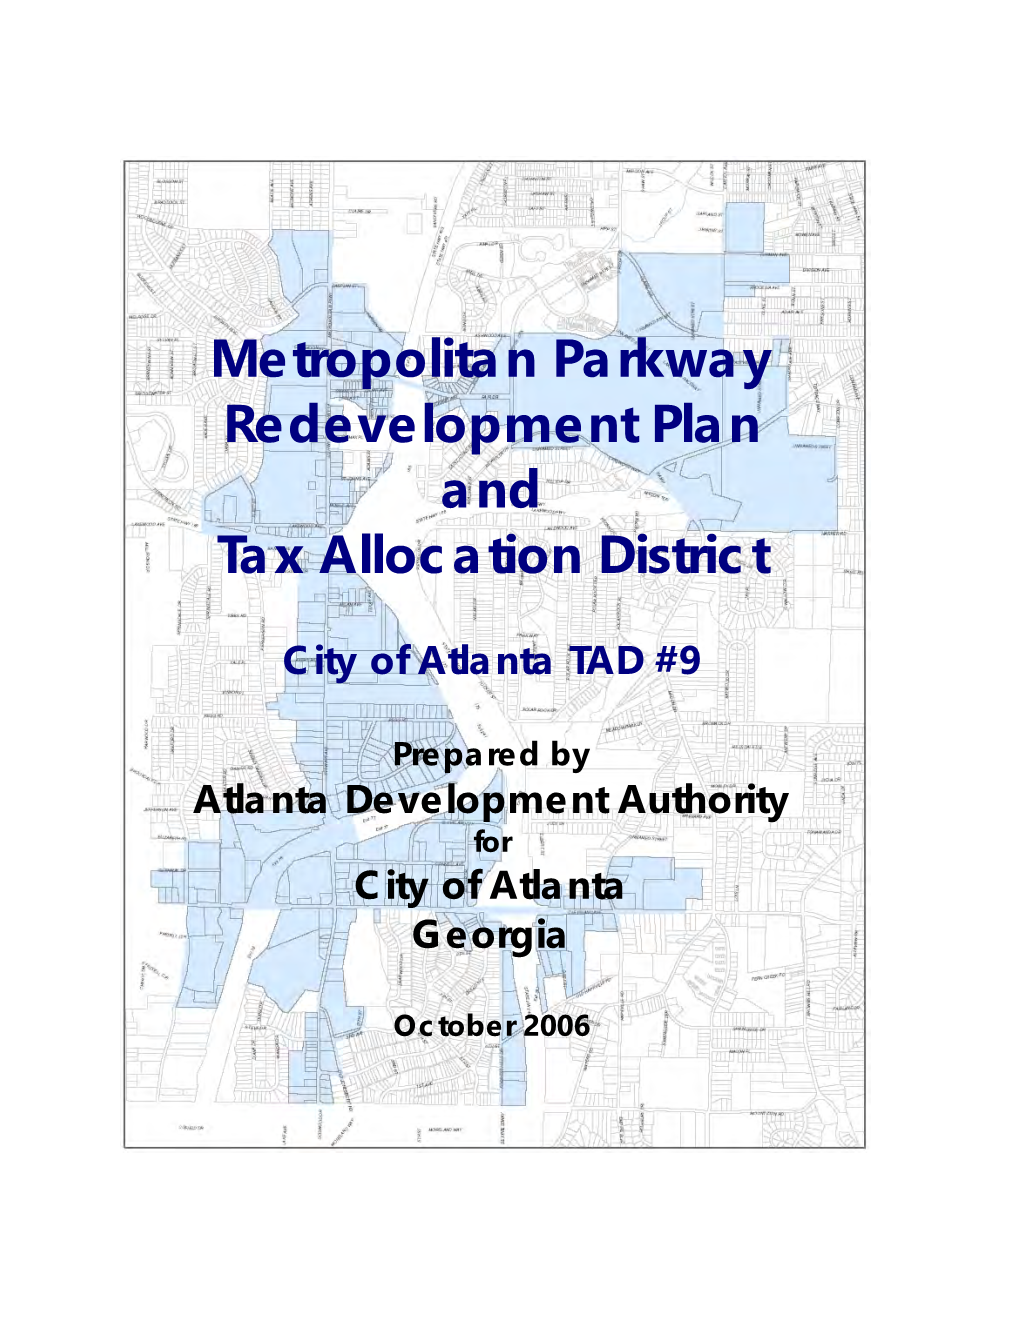 Metropolitan Parkway Redevelopment Plan and Tax Allocation District